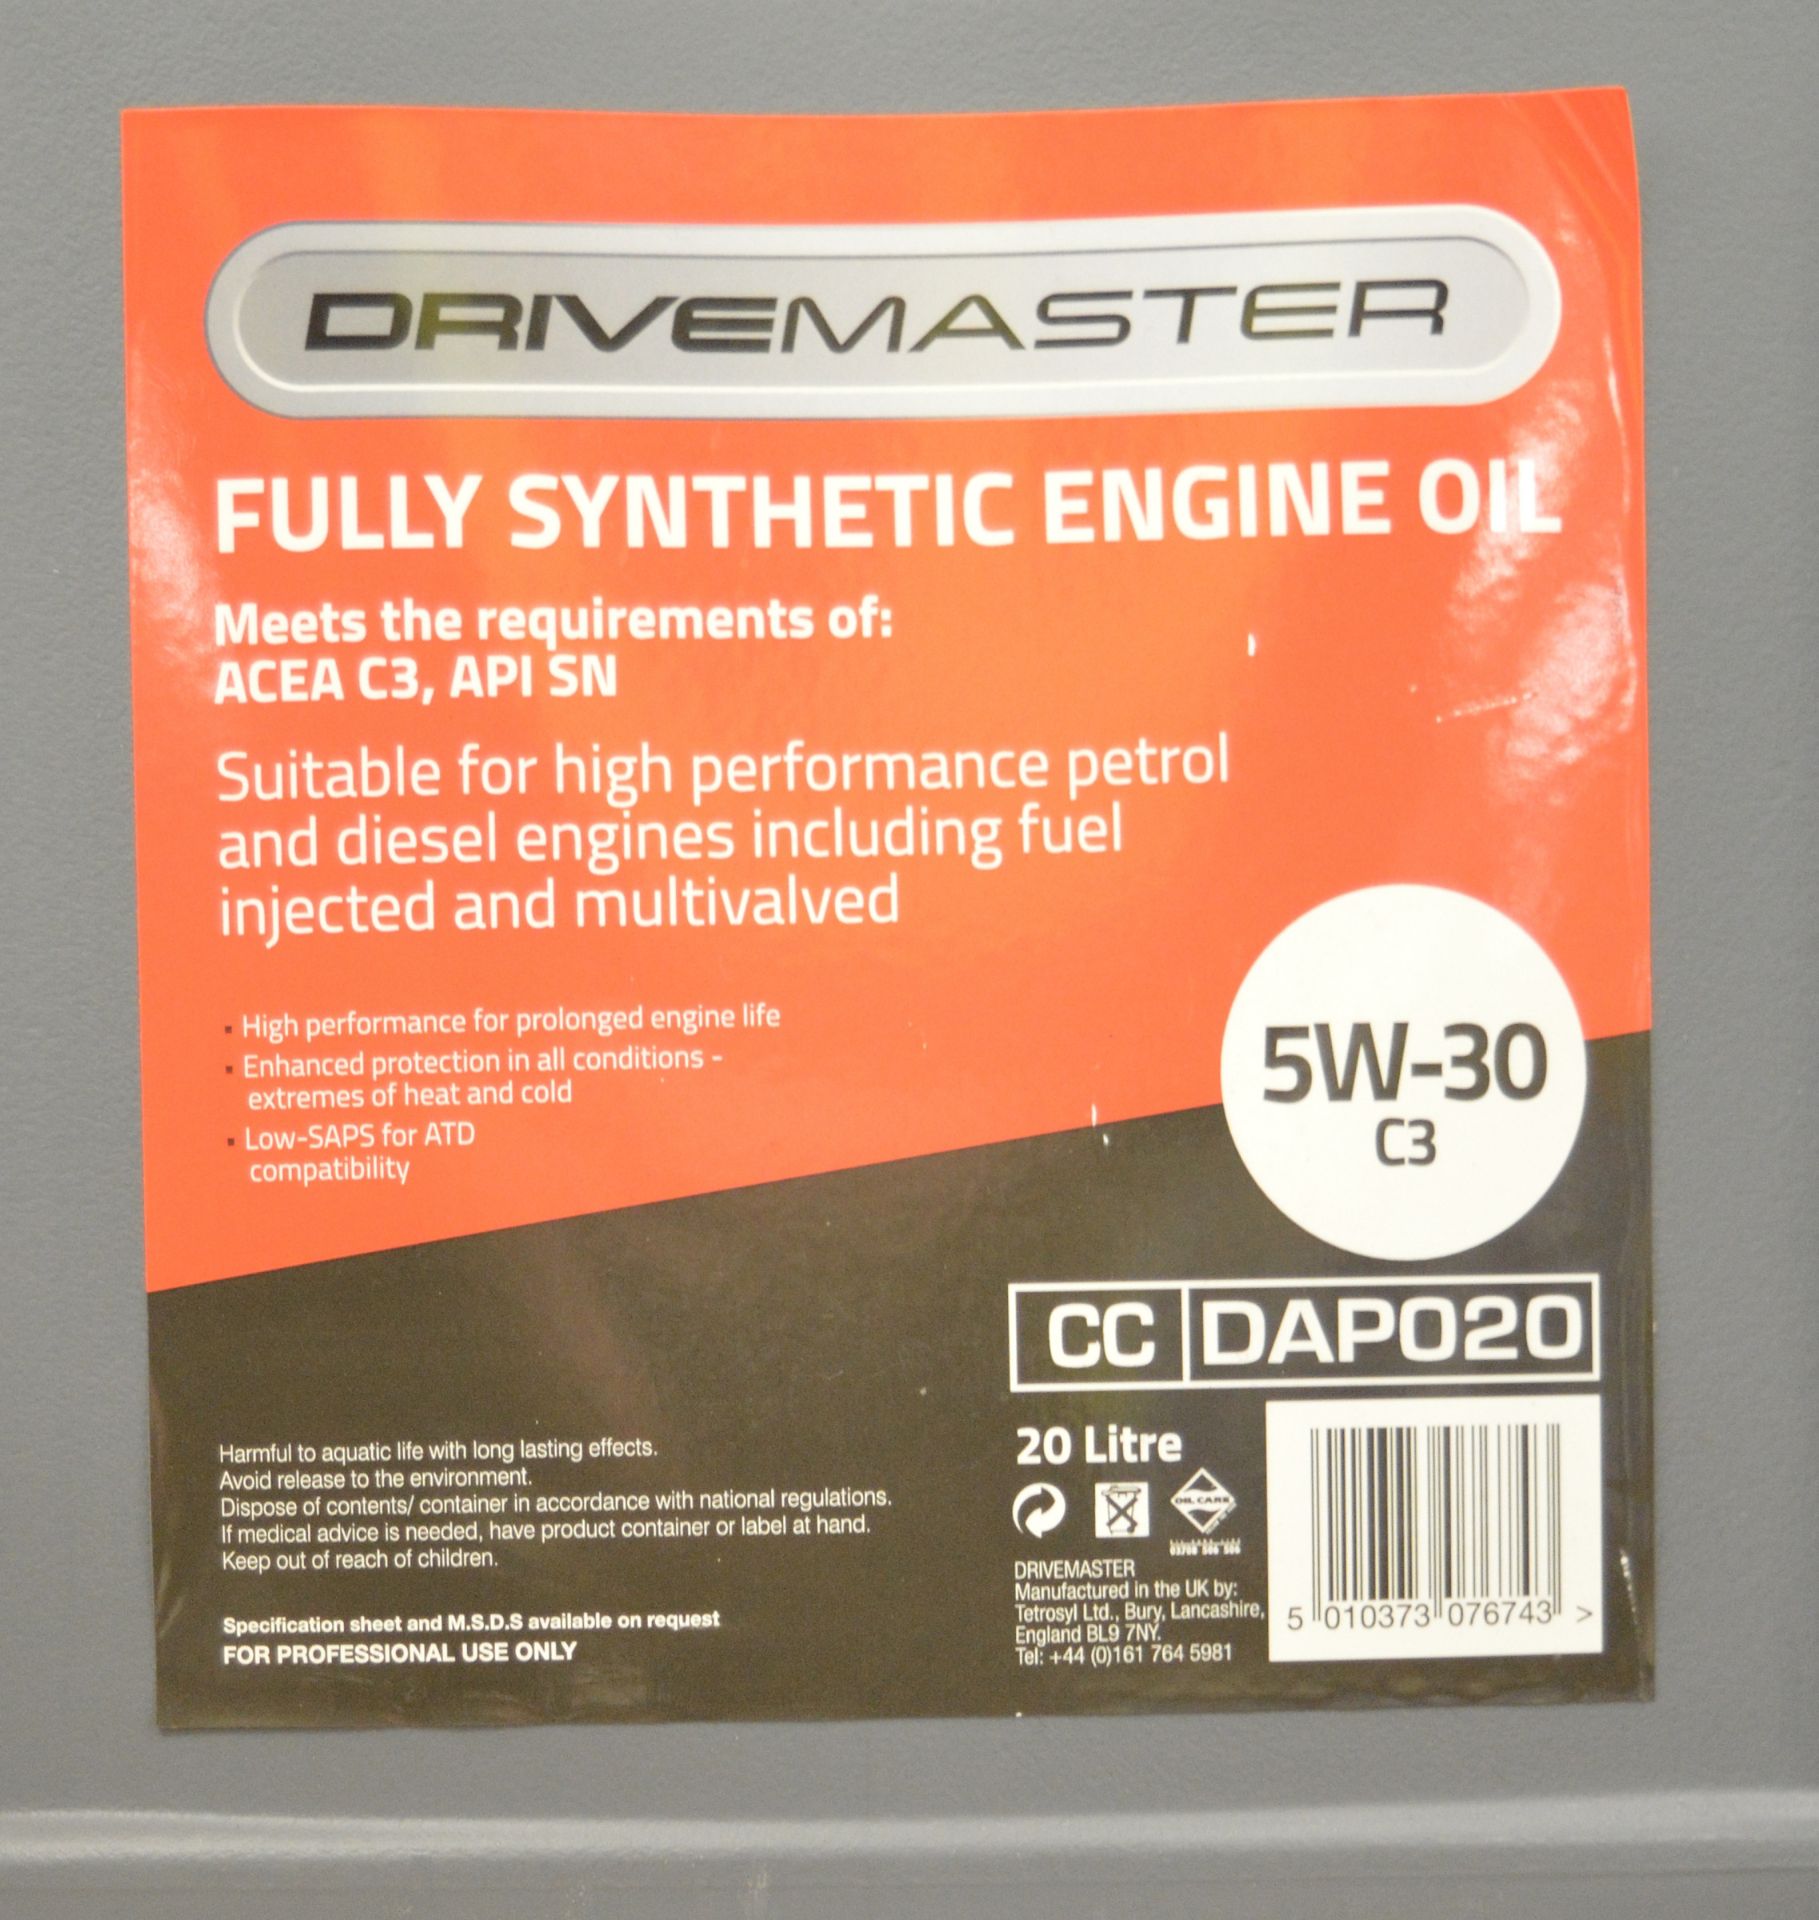 2x Drivemaster Fully Synthetic Engine Oil 5W-30 C3 - 20 Litres - Image 2 of 2